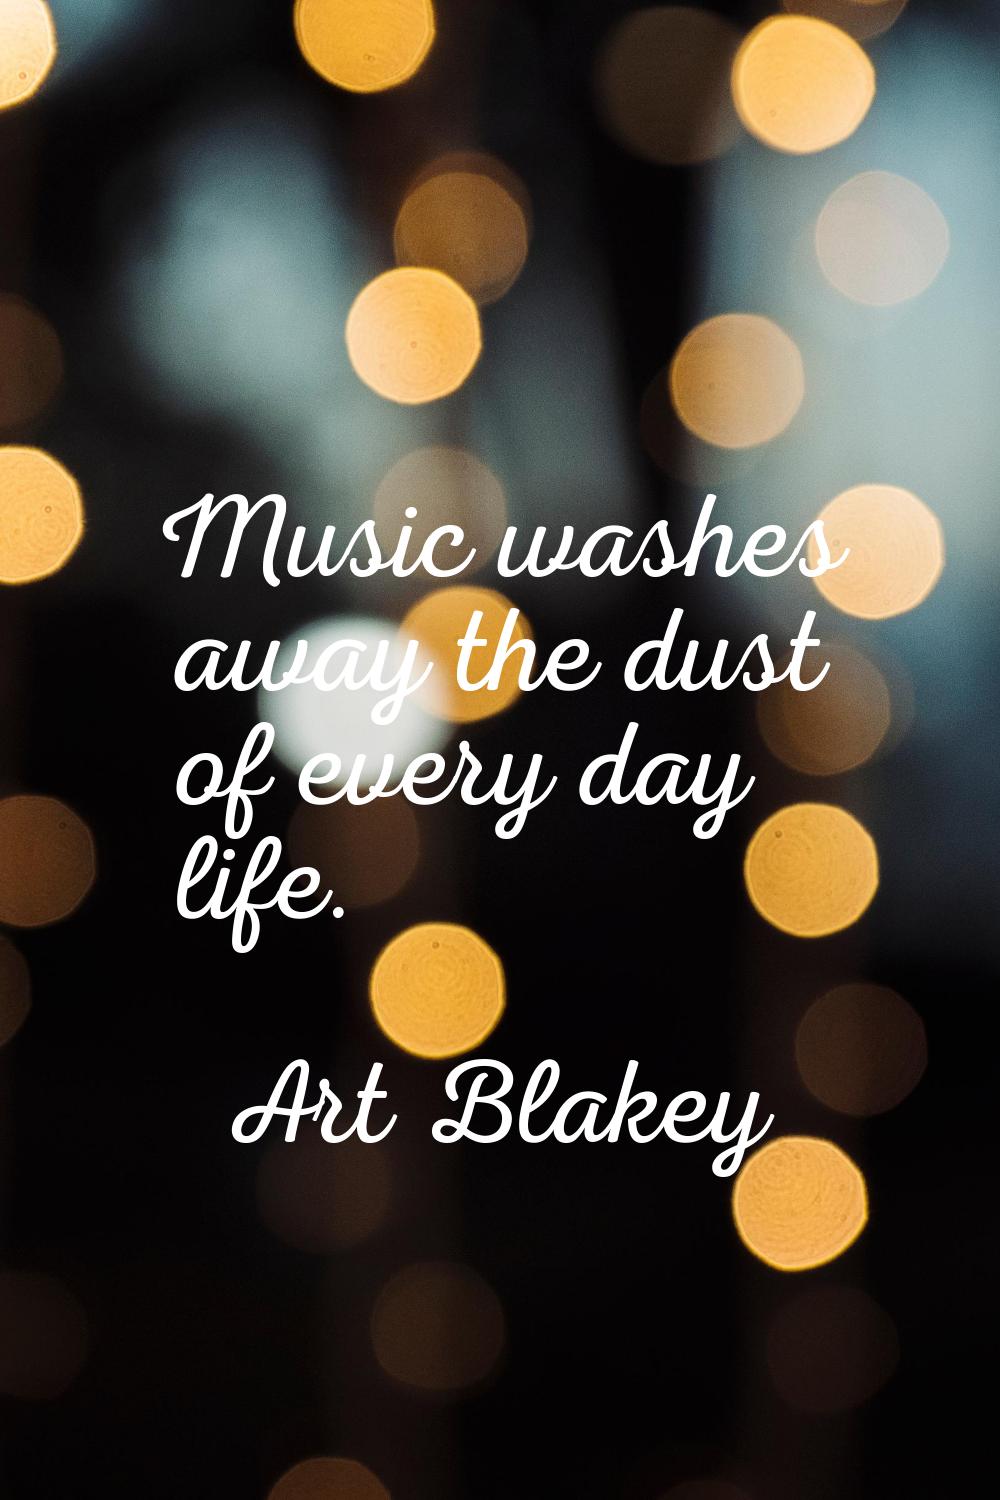 Music washes away the dust of every day life.